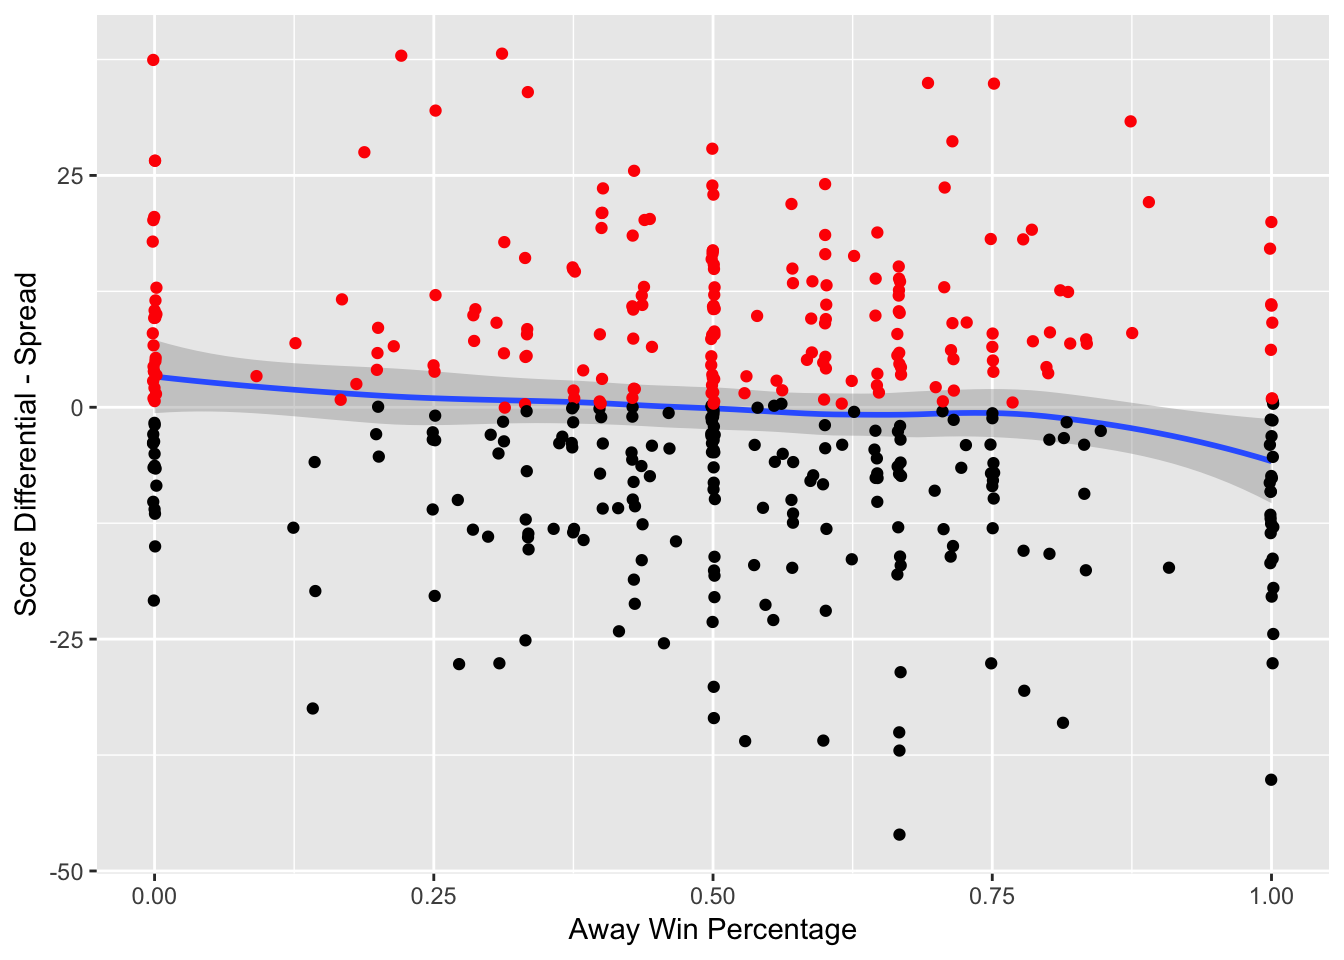 Game Result Against Spread vs. Away Win Percentage -- The red indicates that the team has beat the spread and the black indicates that the team has failed to beat the spread